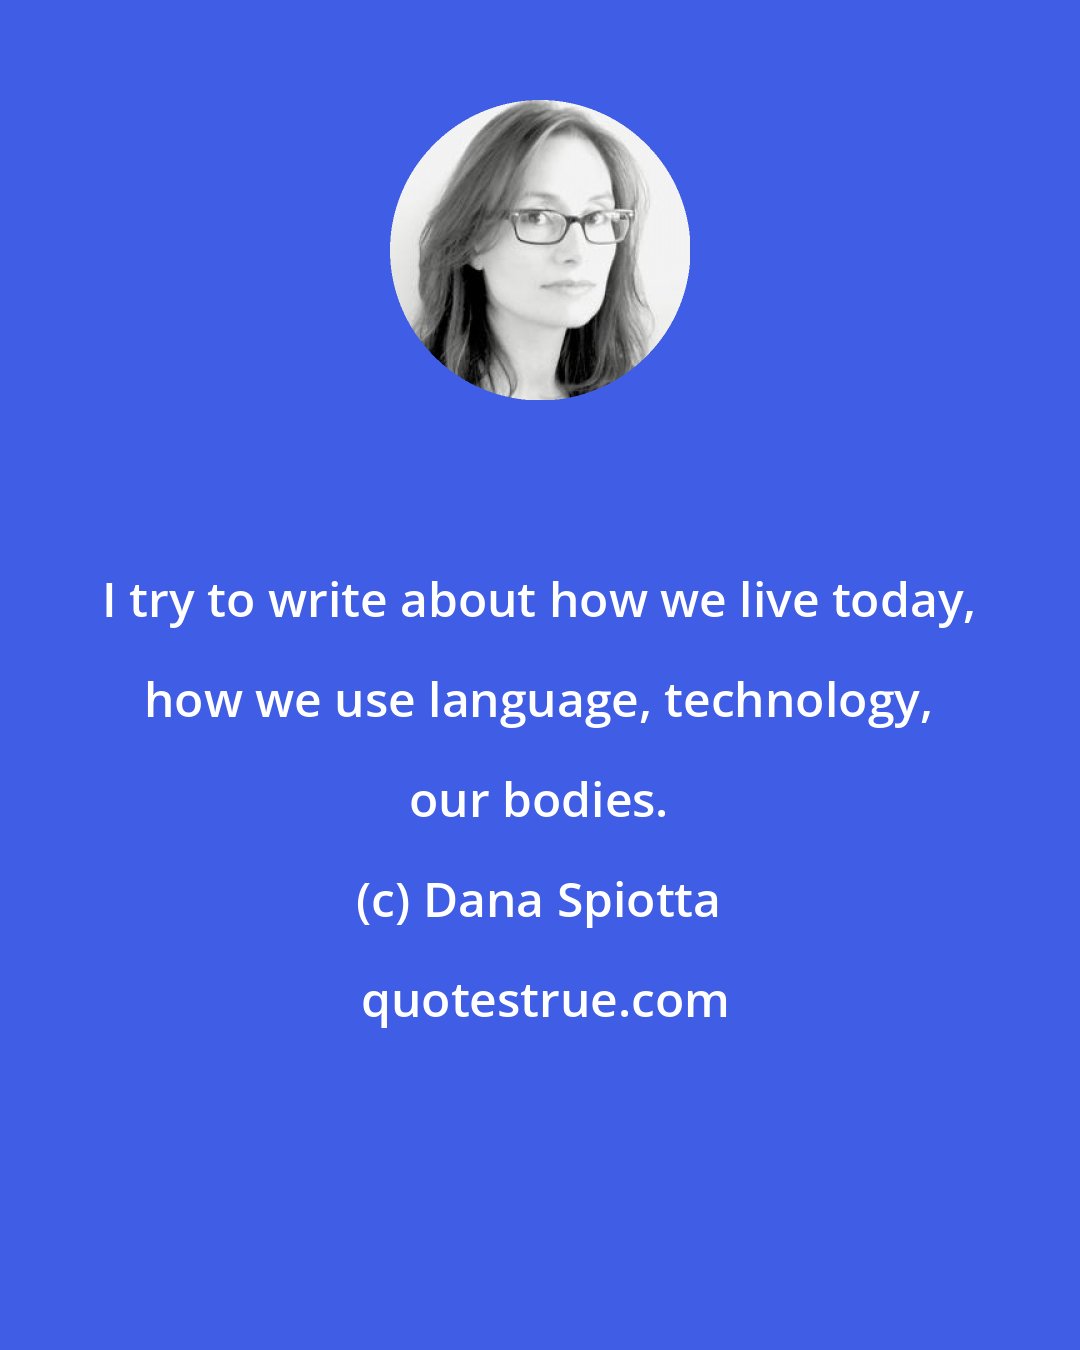 Dana Spiotta: I try to write about how we live today, how we use language, technology, our bodies.